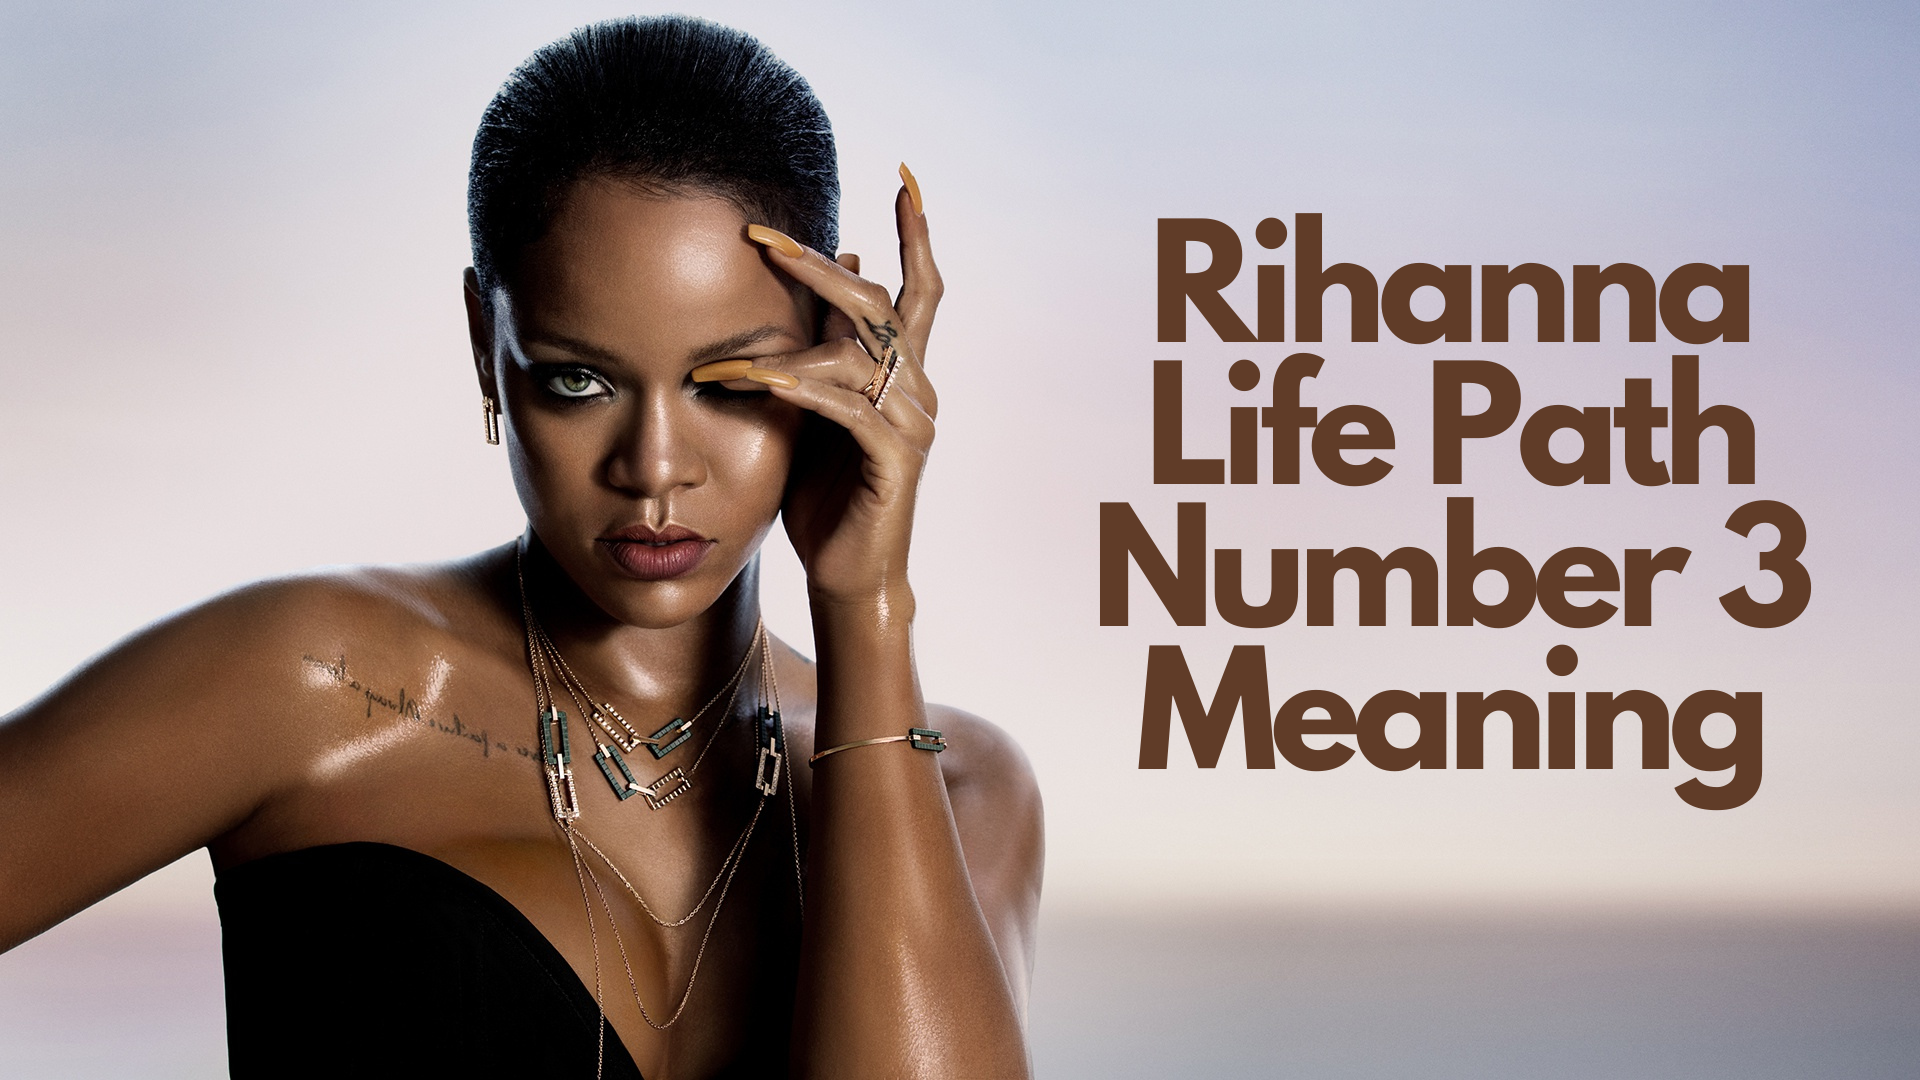 Rihanna wet look with her hand on her right eye and words Rihanna Life Path Number 3 Meaning